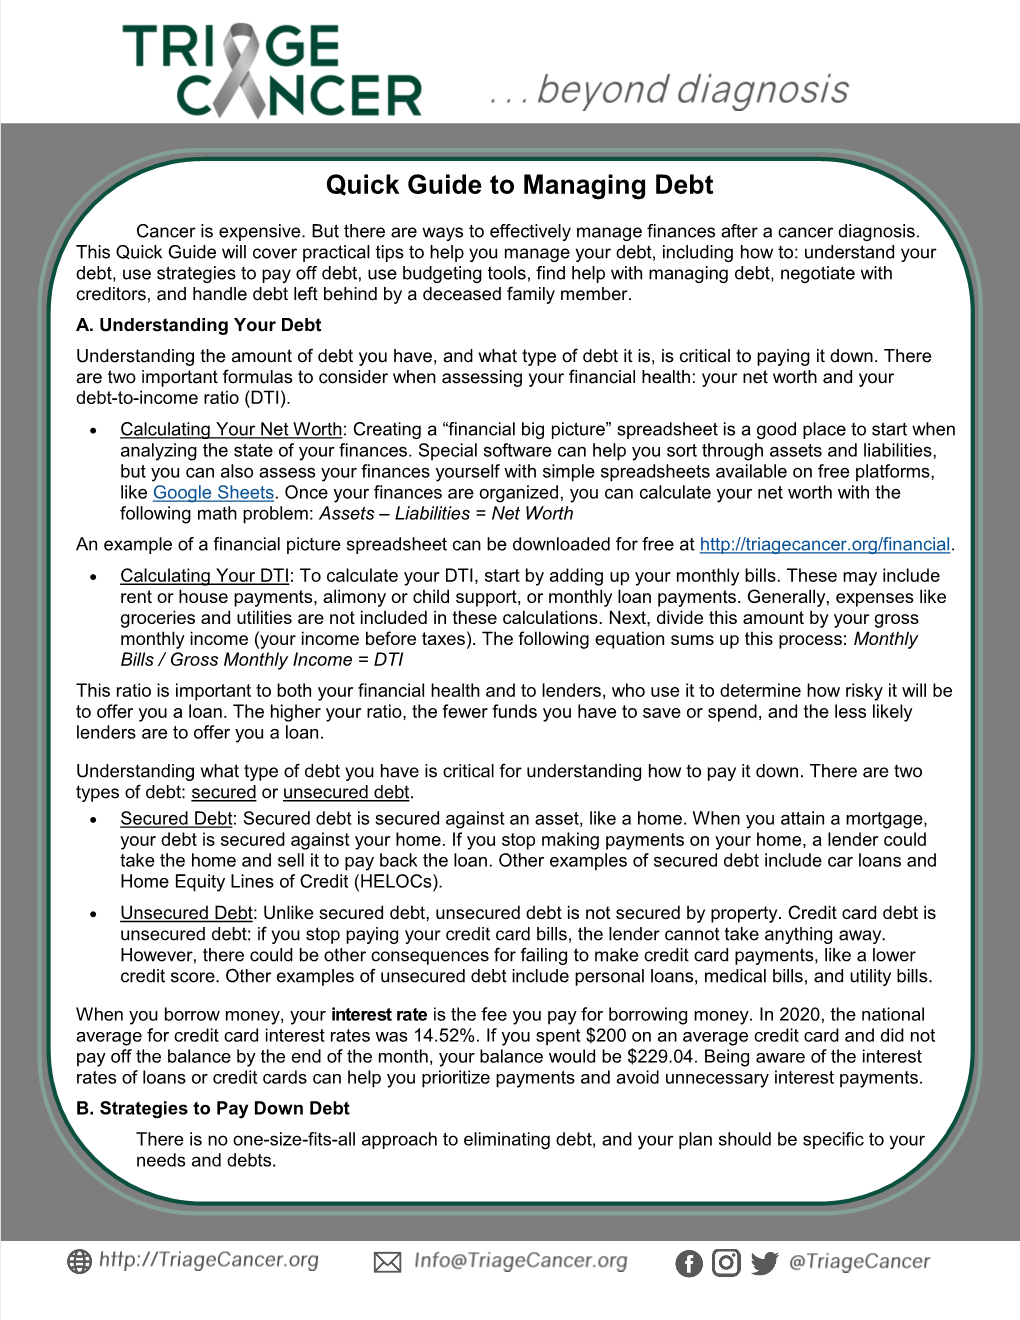 Quick Guide to Managing Debt